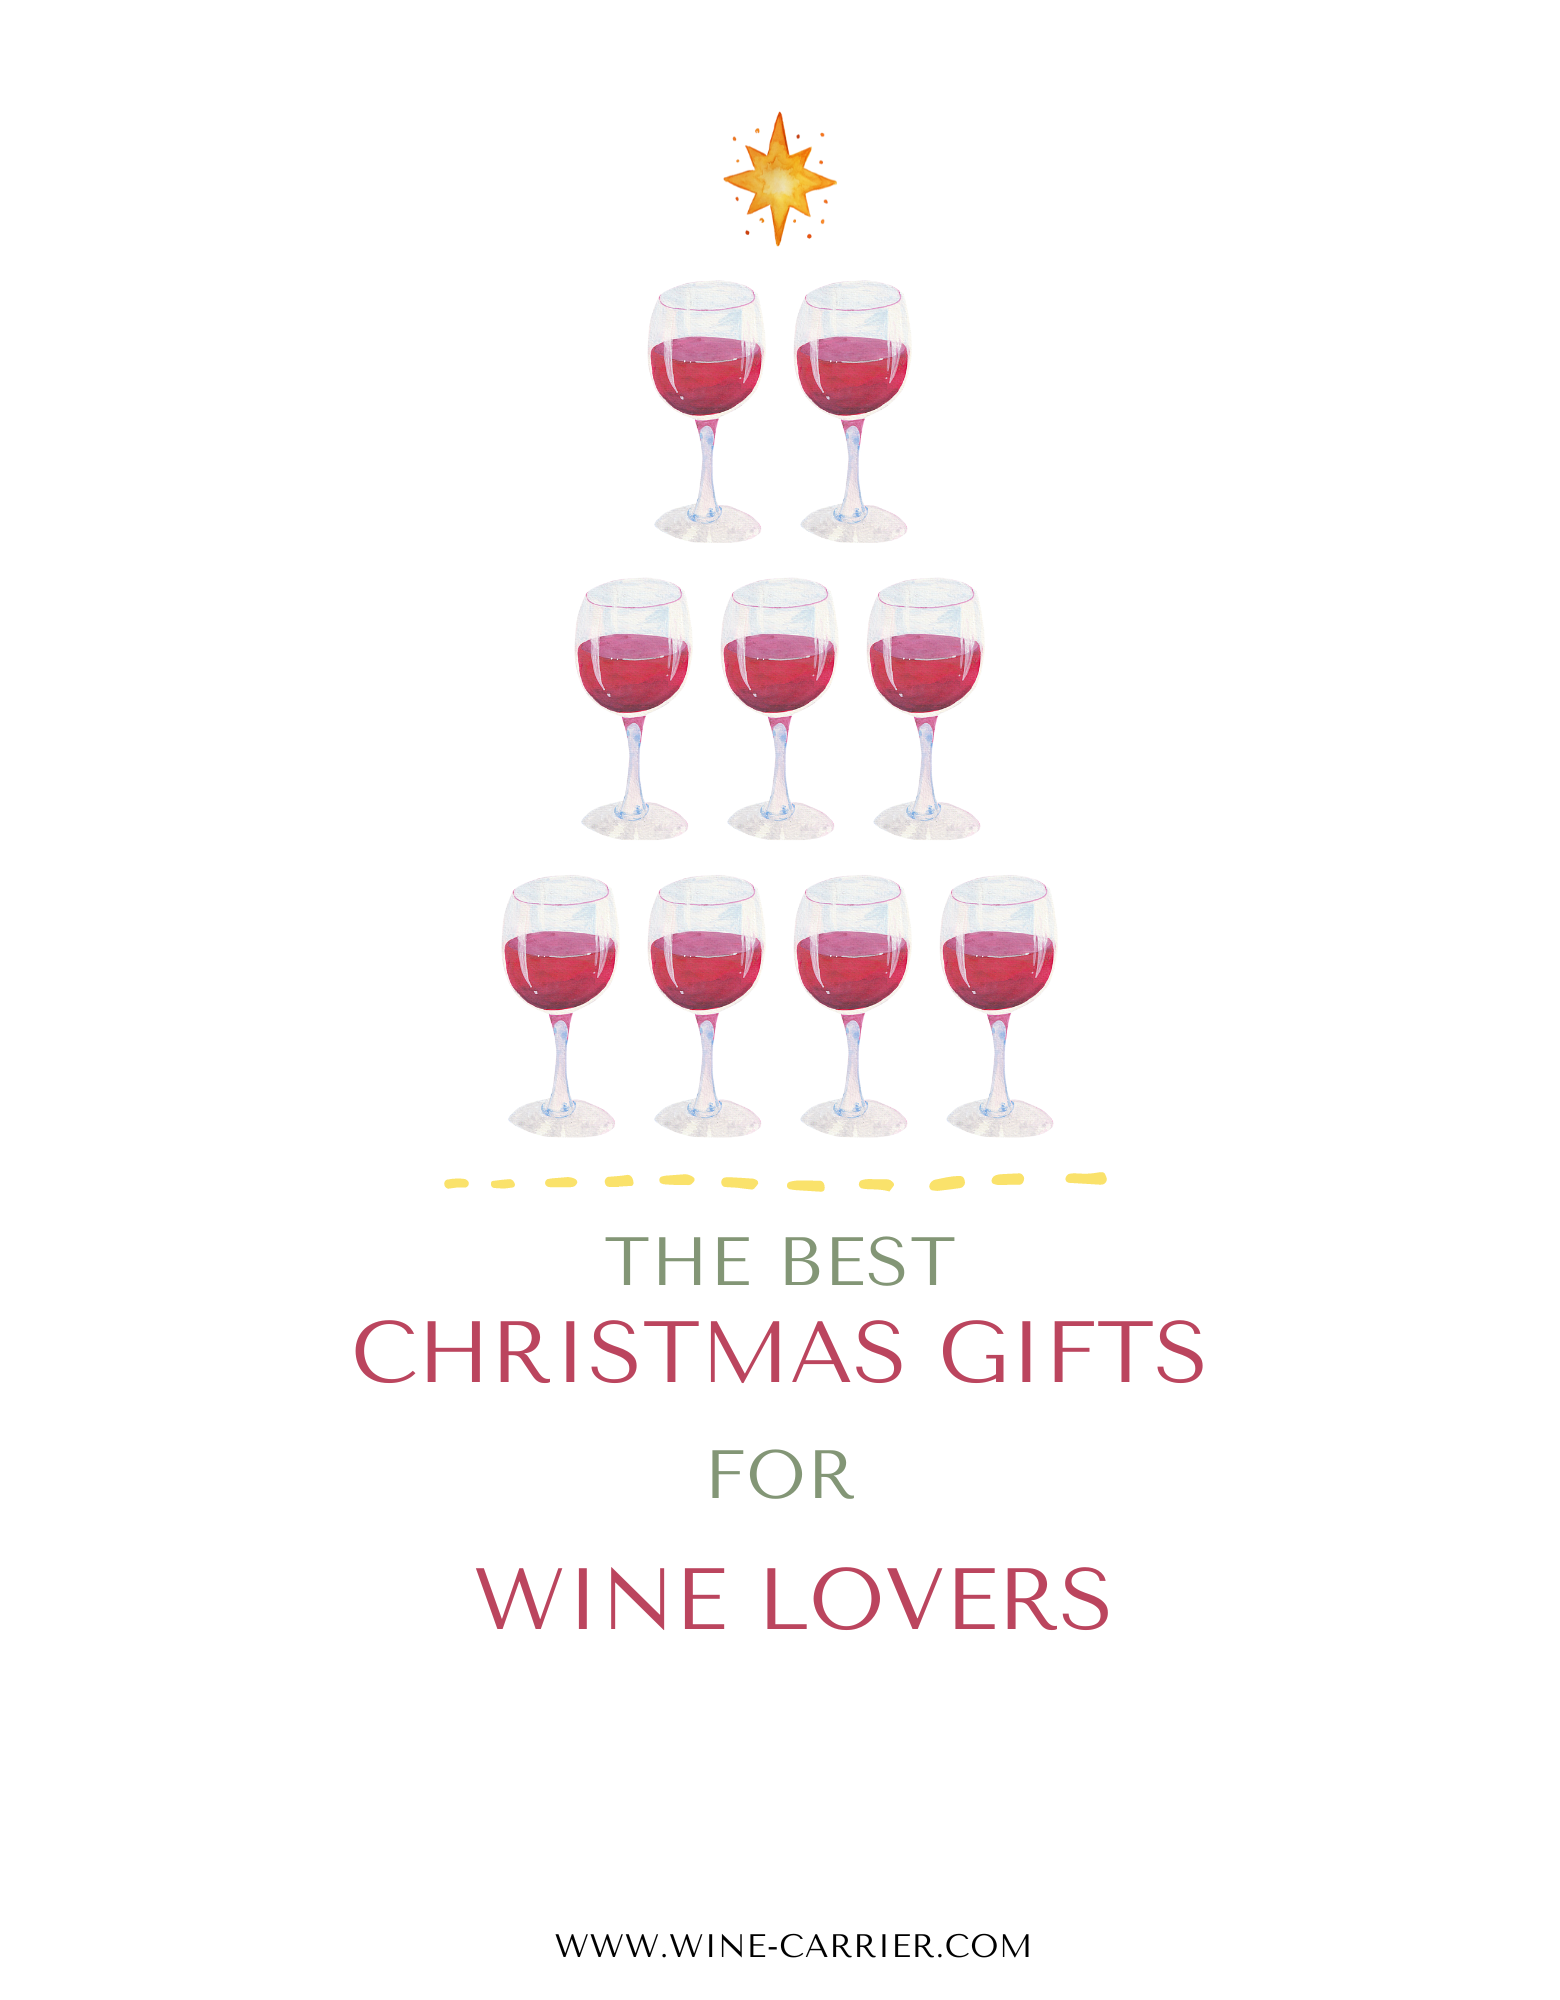 The Best Christmas Gifts for Wine Lovers